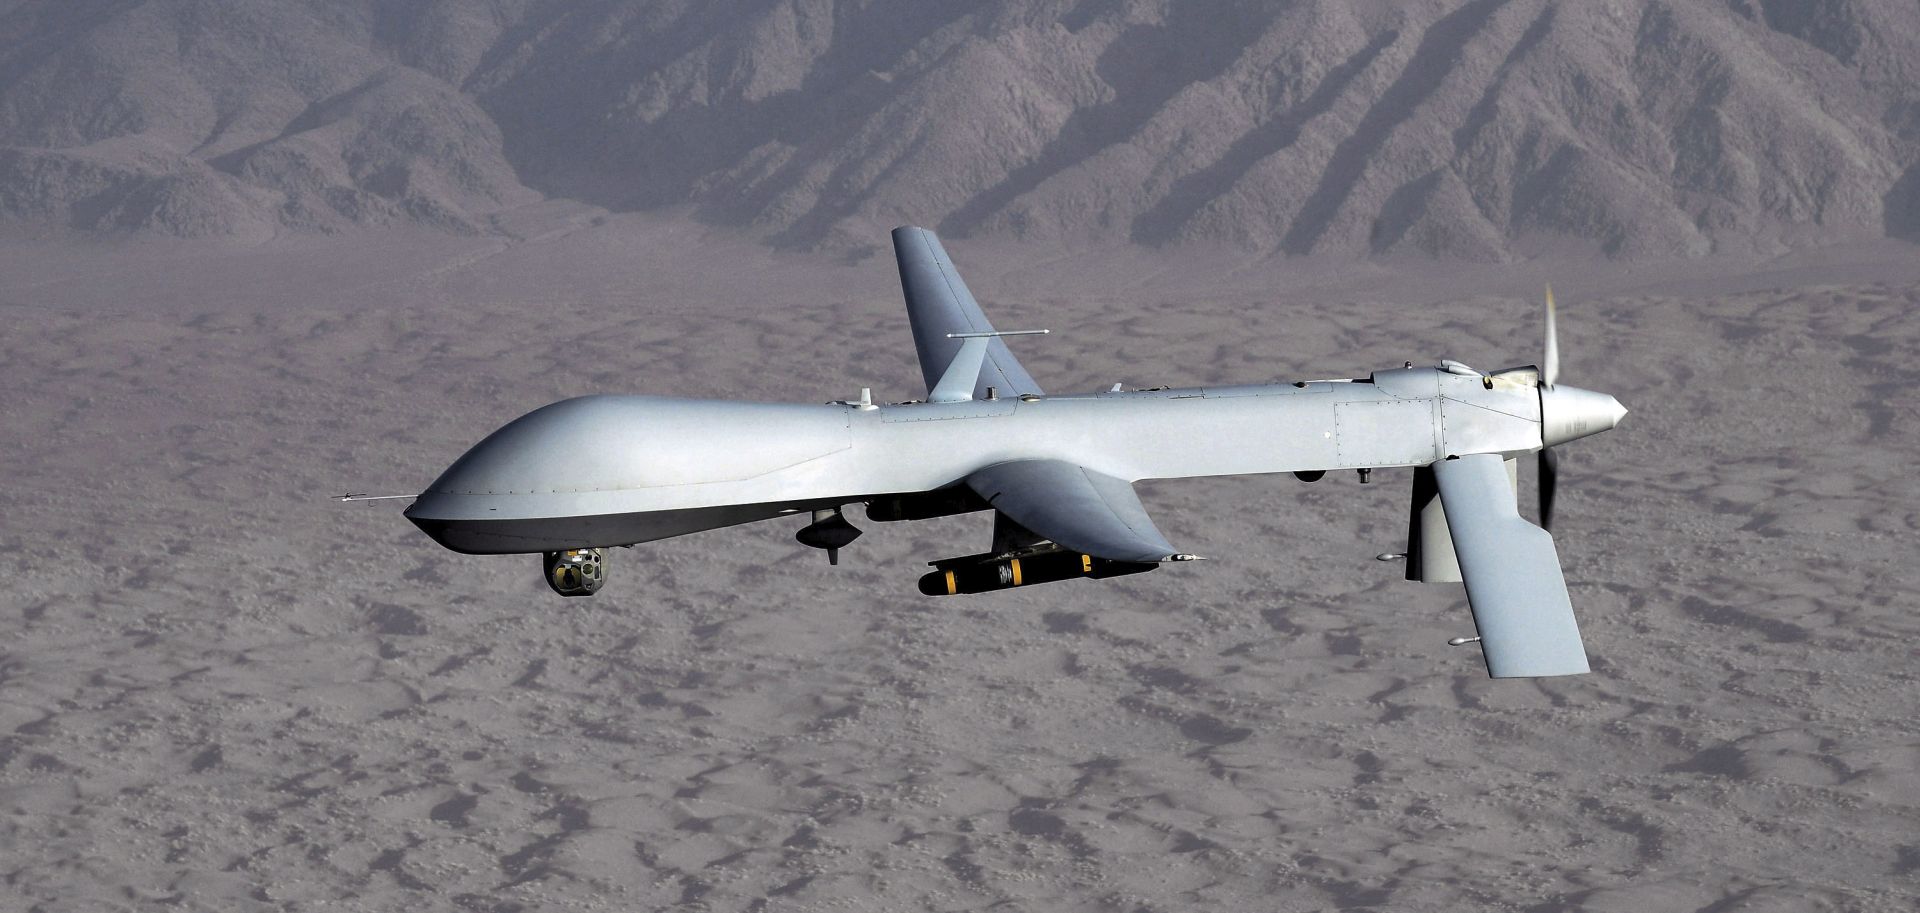 epa07659380 (FILE) - An undated handout photo made available by the US Air Force shows a MQ-1 Predator unmanned aircraft in flight at an undiclosed location, reissued 20 June 2019. Media reports on 20 June 2019 state that Iran's Islamic Revolution Guards Corps (IRGC) claim to have shot down a US spy drone over Iranian airspace, near Kuhmobarak in Iran's southern Hormozgan province. The US military has not confirmed if a drone was hit.  EPA/LT. COL. LESLIE PRATT / US AIR FORCE  / HANDOUT HANDOUT  HANDOUT EDITORIAL USE ONLY/NO SALES *** Local Caption *** 51805112